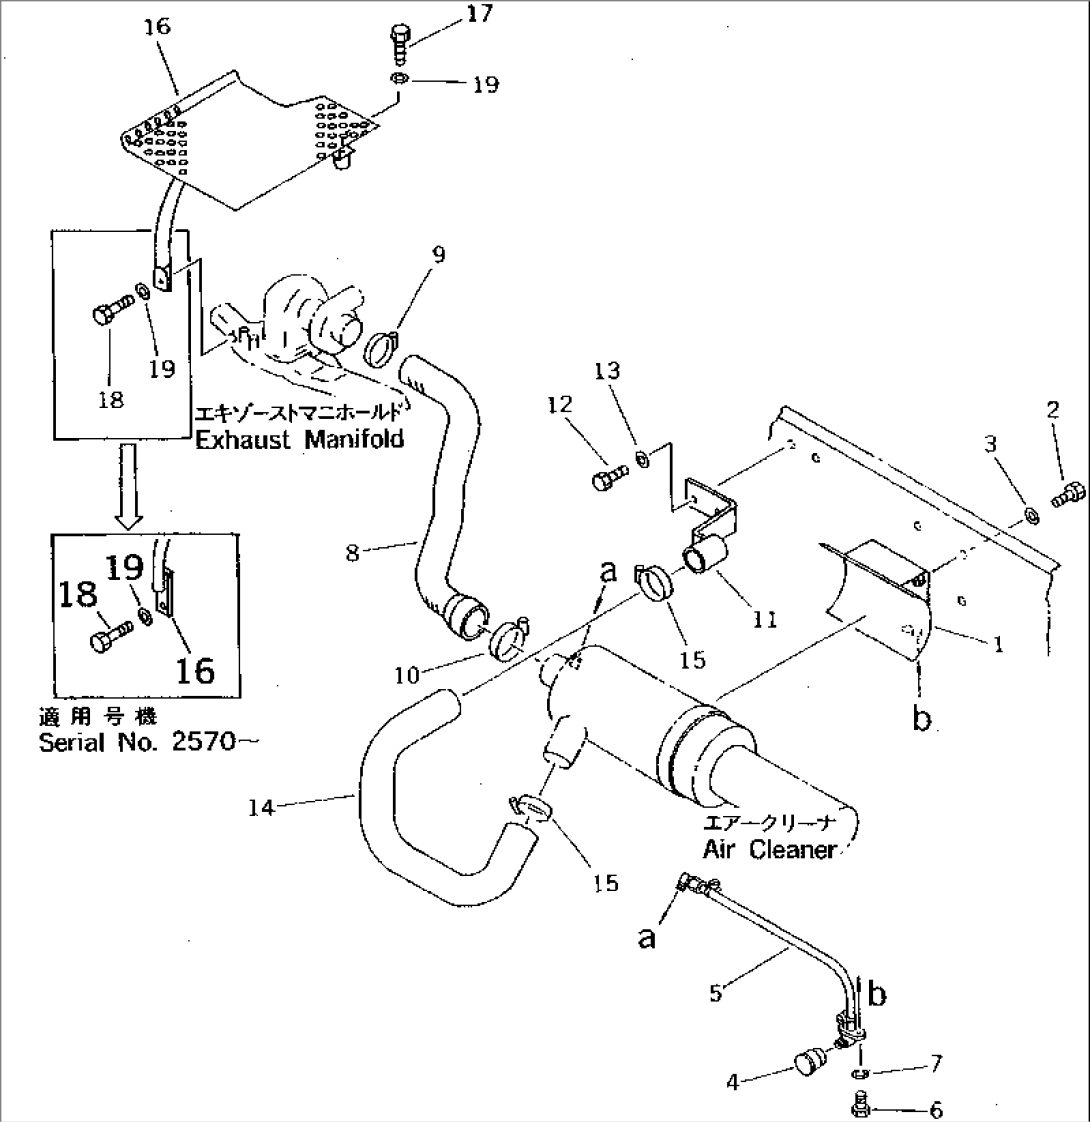 AIR CLEANER CONNECTION AND STEP (NOISE SUPPRESSION SPEC.)(#2301-)